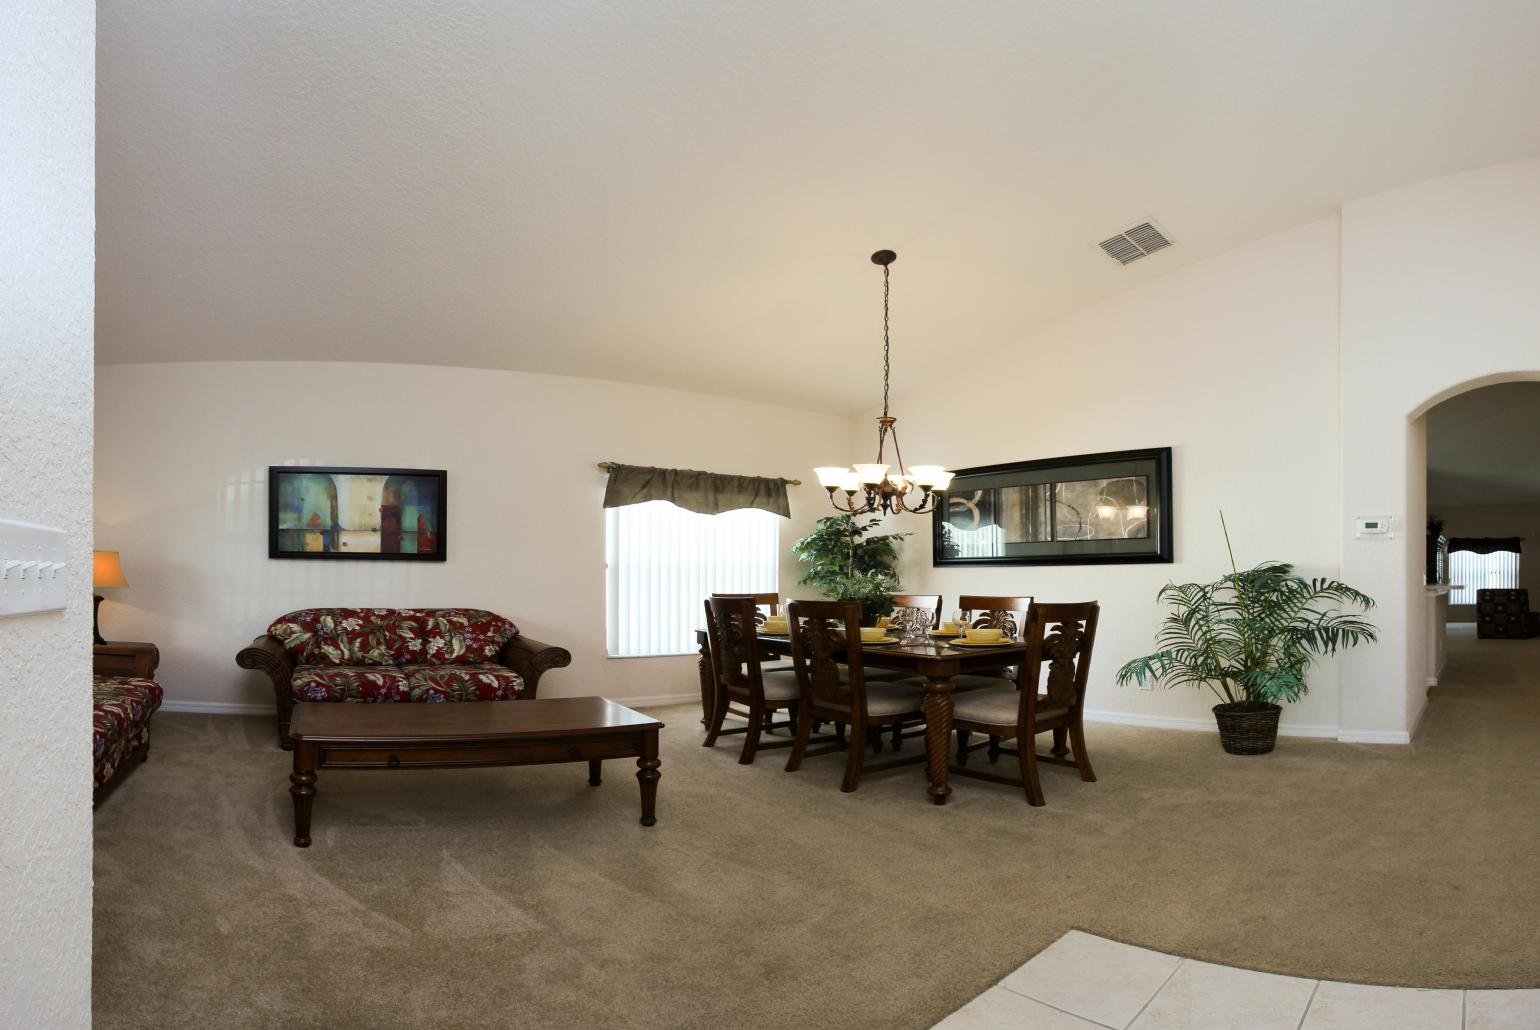 Open-plan living room with equipped kitchen and dining area.